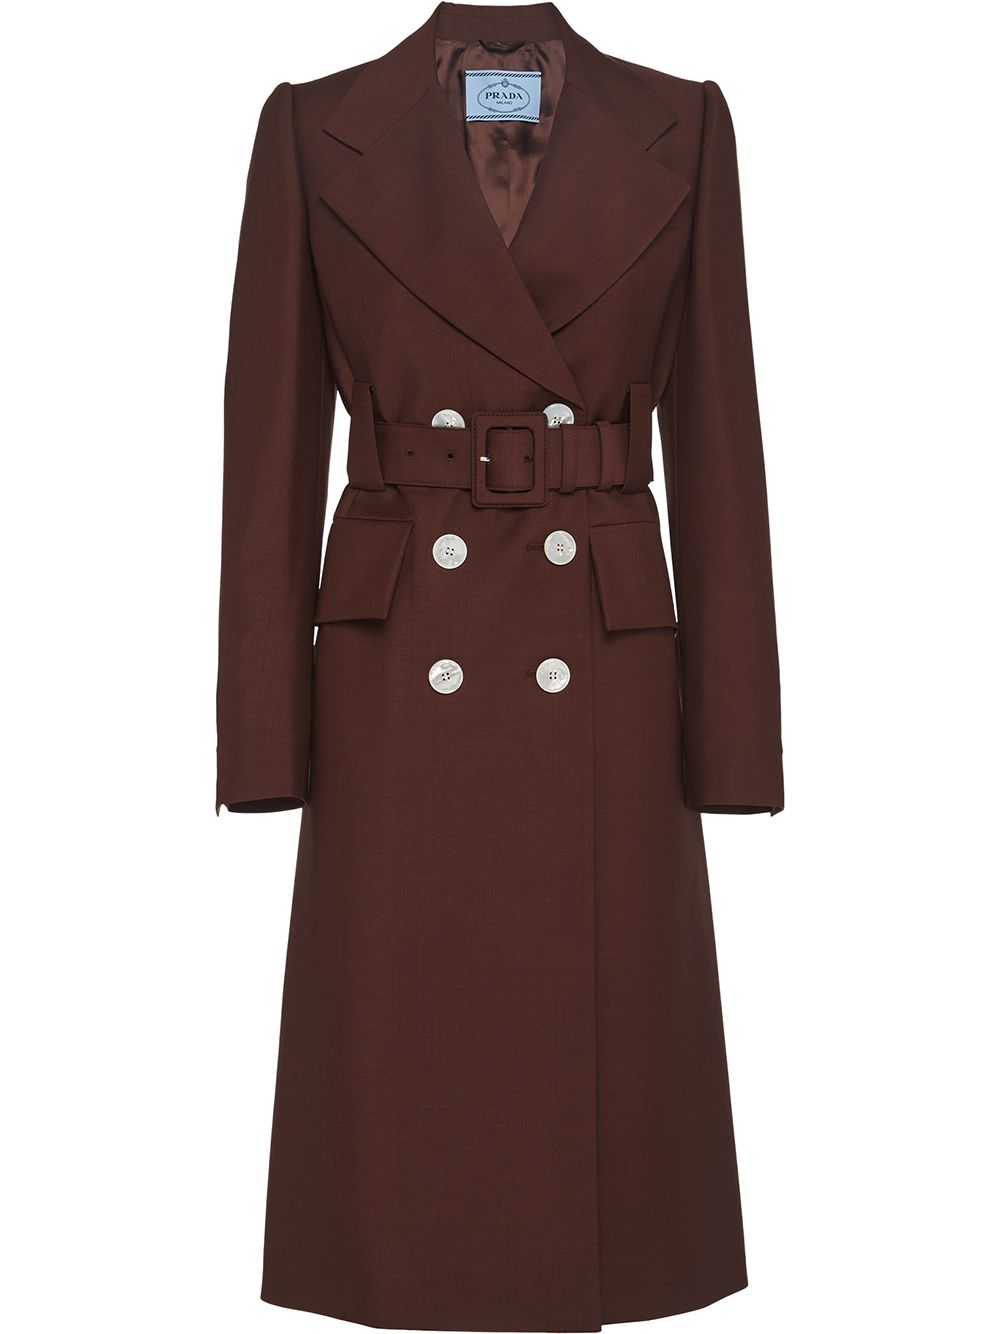 Prada double-breasted Belted Coat - Farfetch